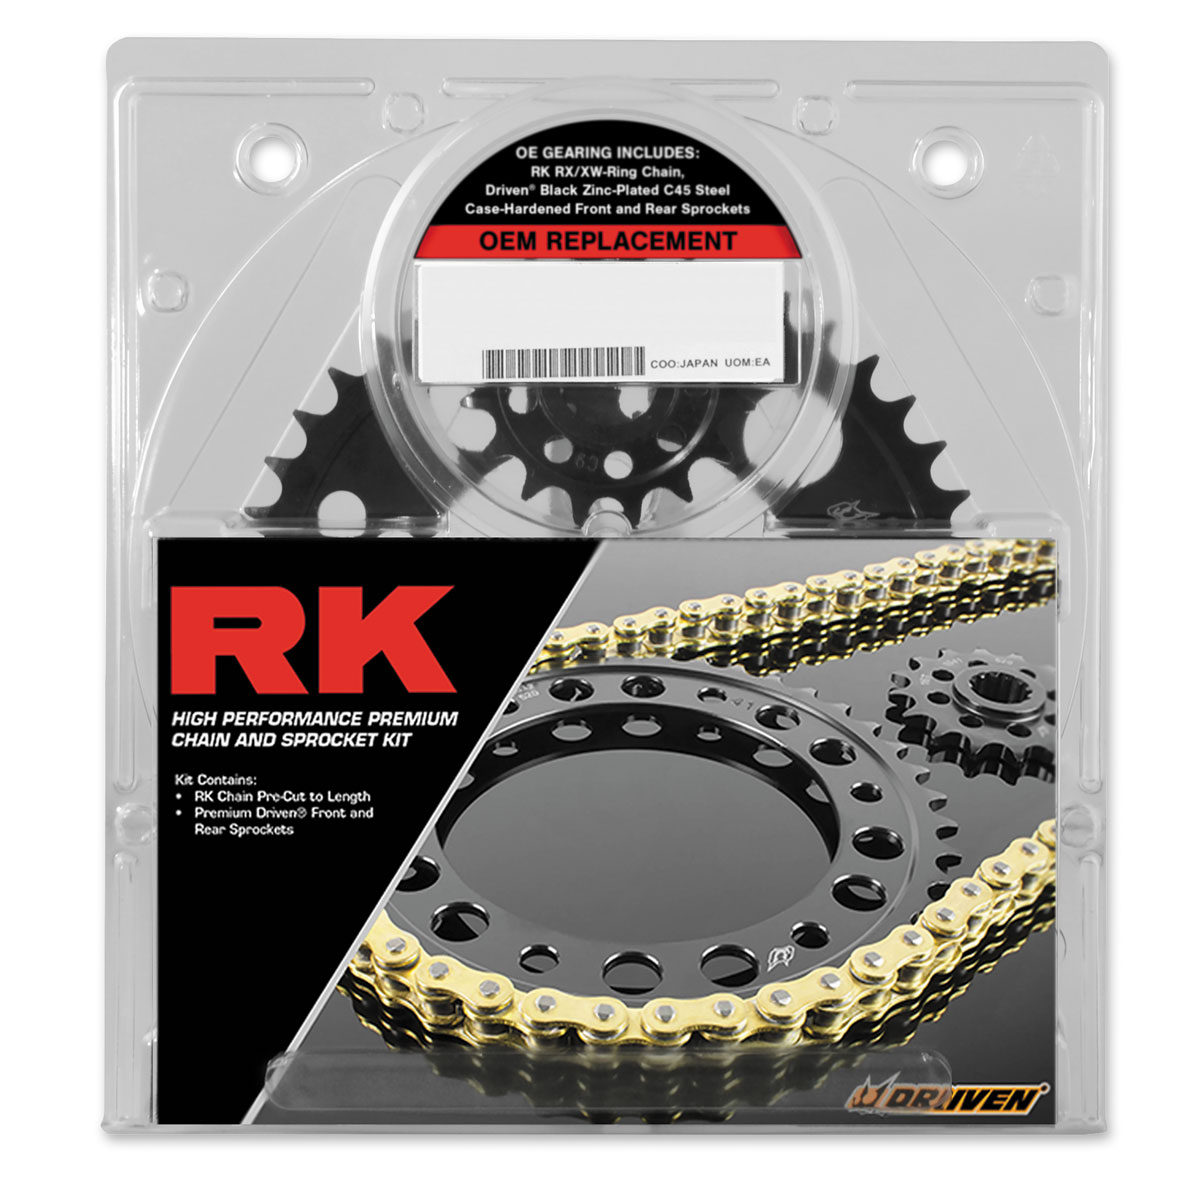 RK Chains 520 O.E.M. Replacement Chain and Sprocket Kit